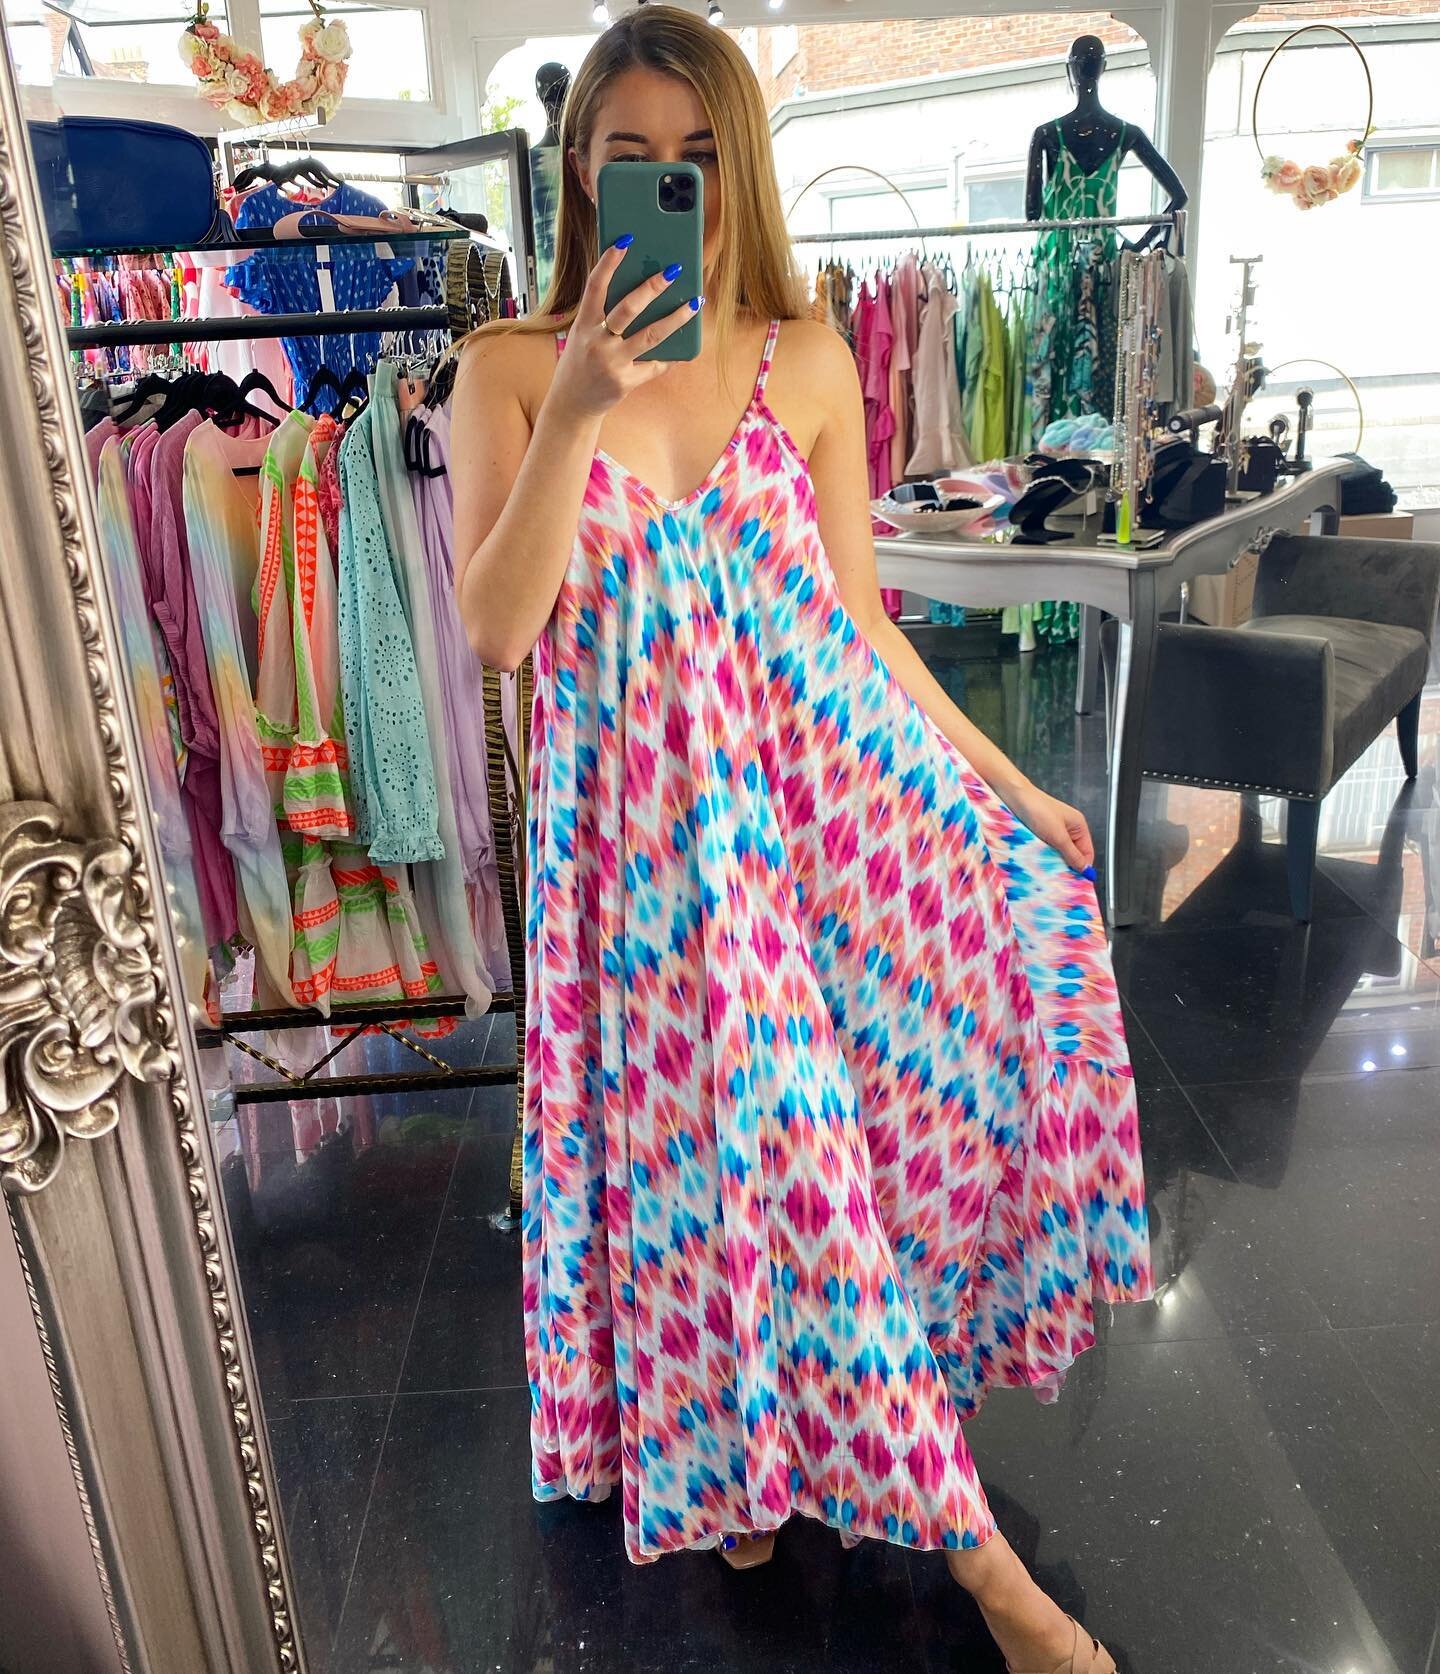 Always such a sell out style and such beautiful colours! One size fits UK sizes 8-18.

Available in both shops and online at www.blushboutiques.co.uk ☀️
.
.
.
#summerdresses #bucks #boutique #boutiqueshopping #boutiquestyle #boutiquefashion #oldamers